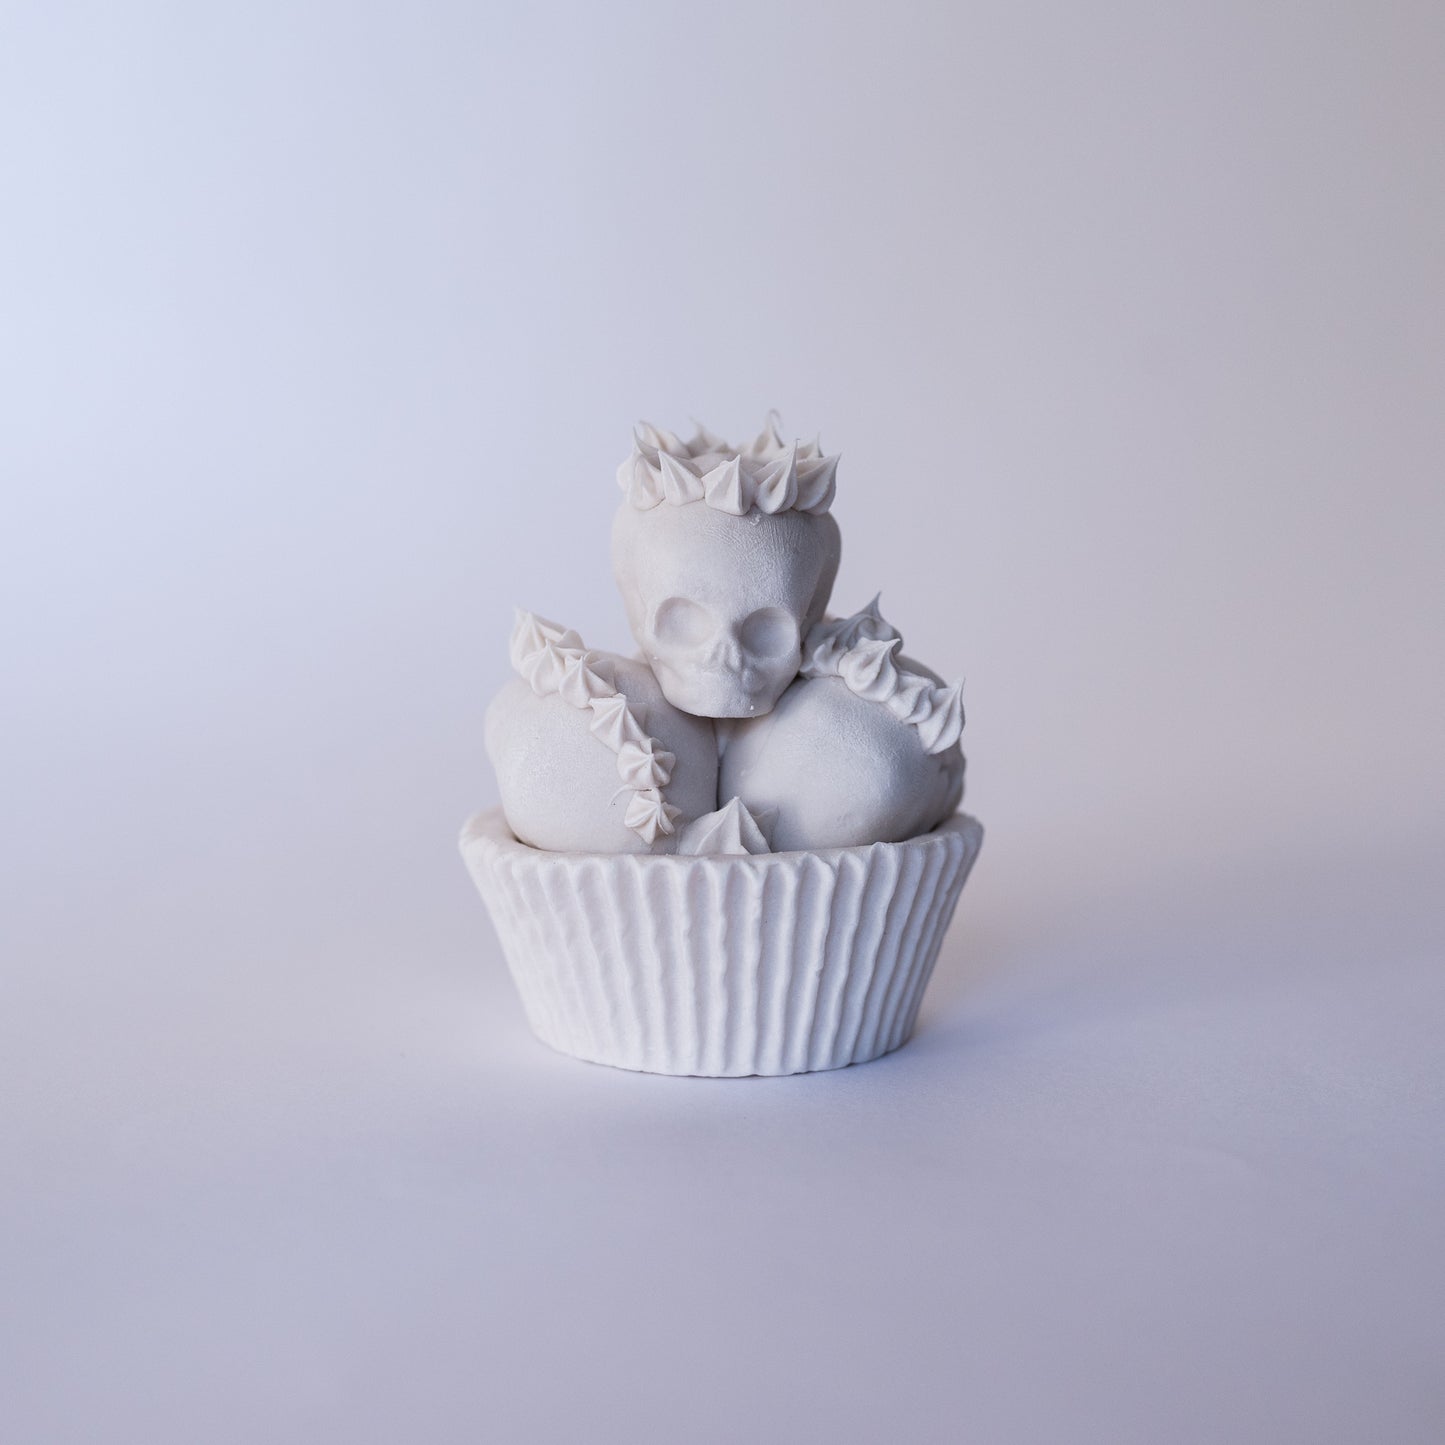 Angels and Punk cupcake (Limited Edition Porcelain Sculpture)